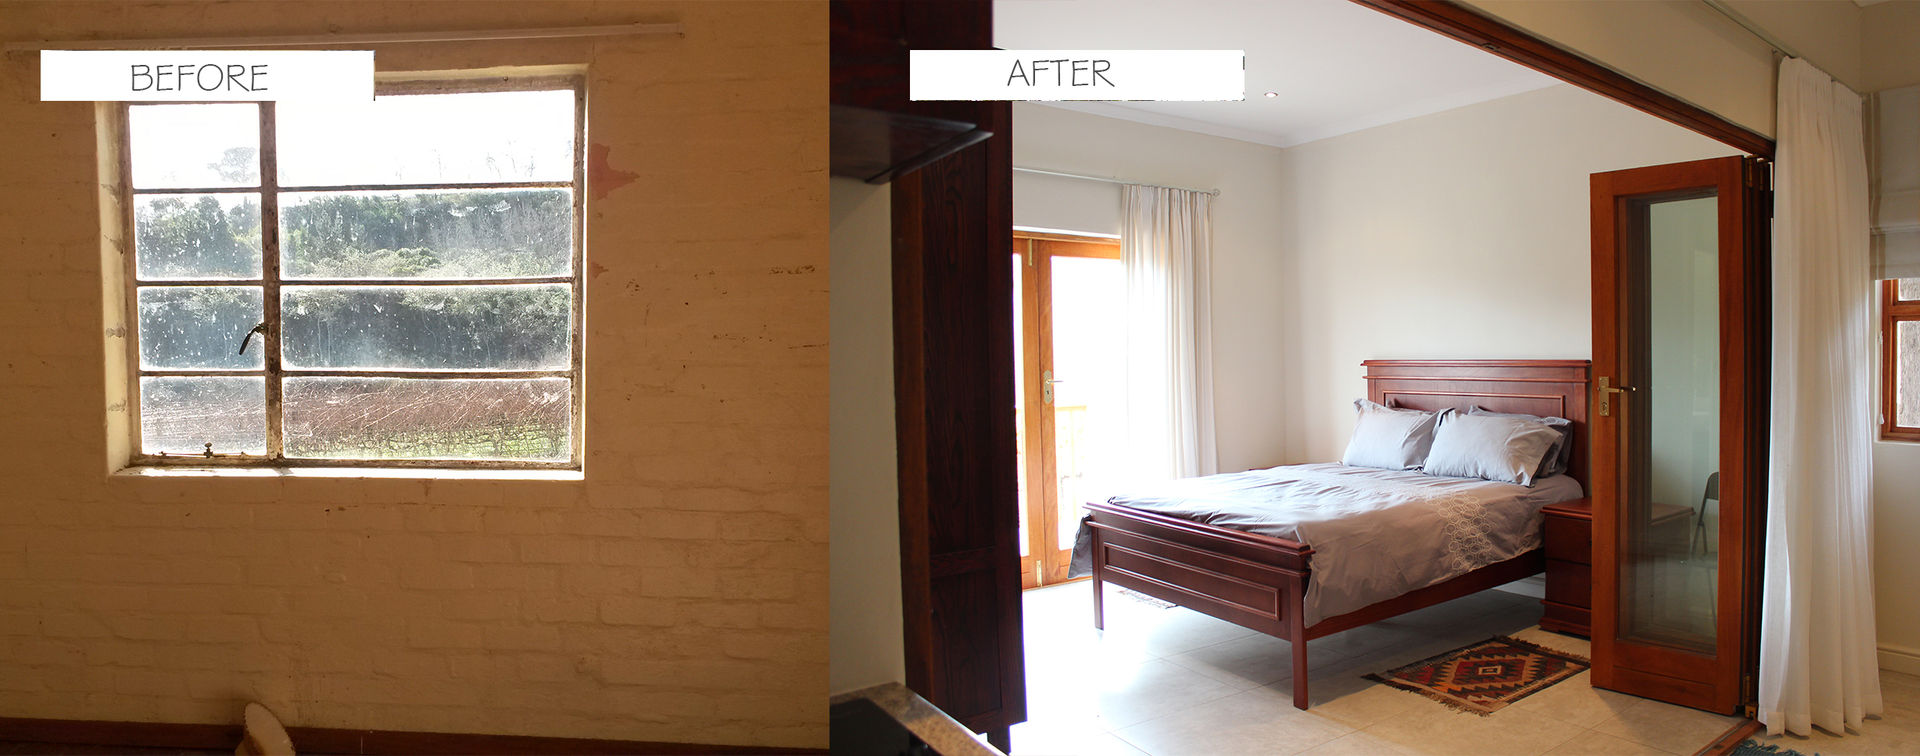 Before & After Covet Design Classic style bedroom